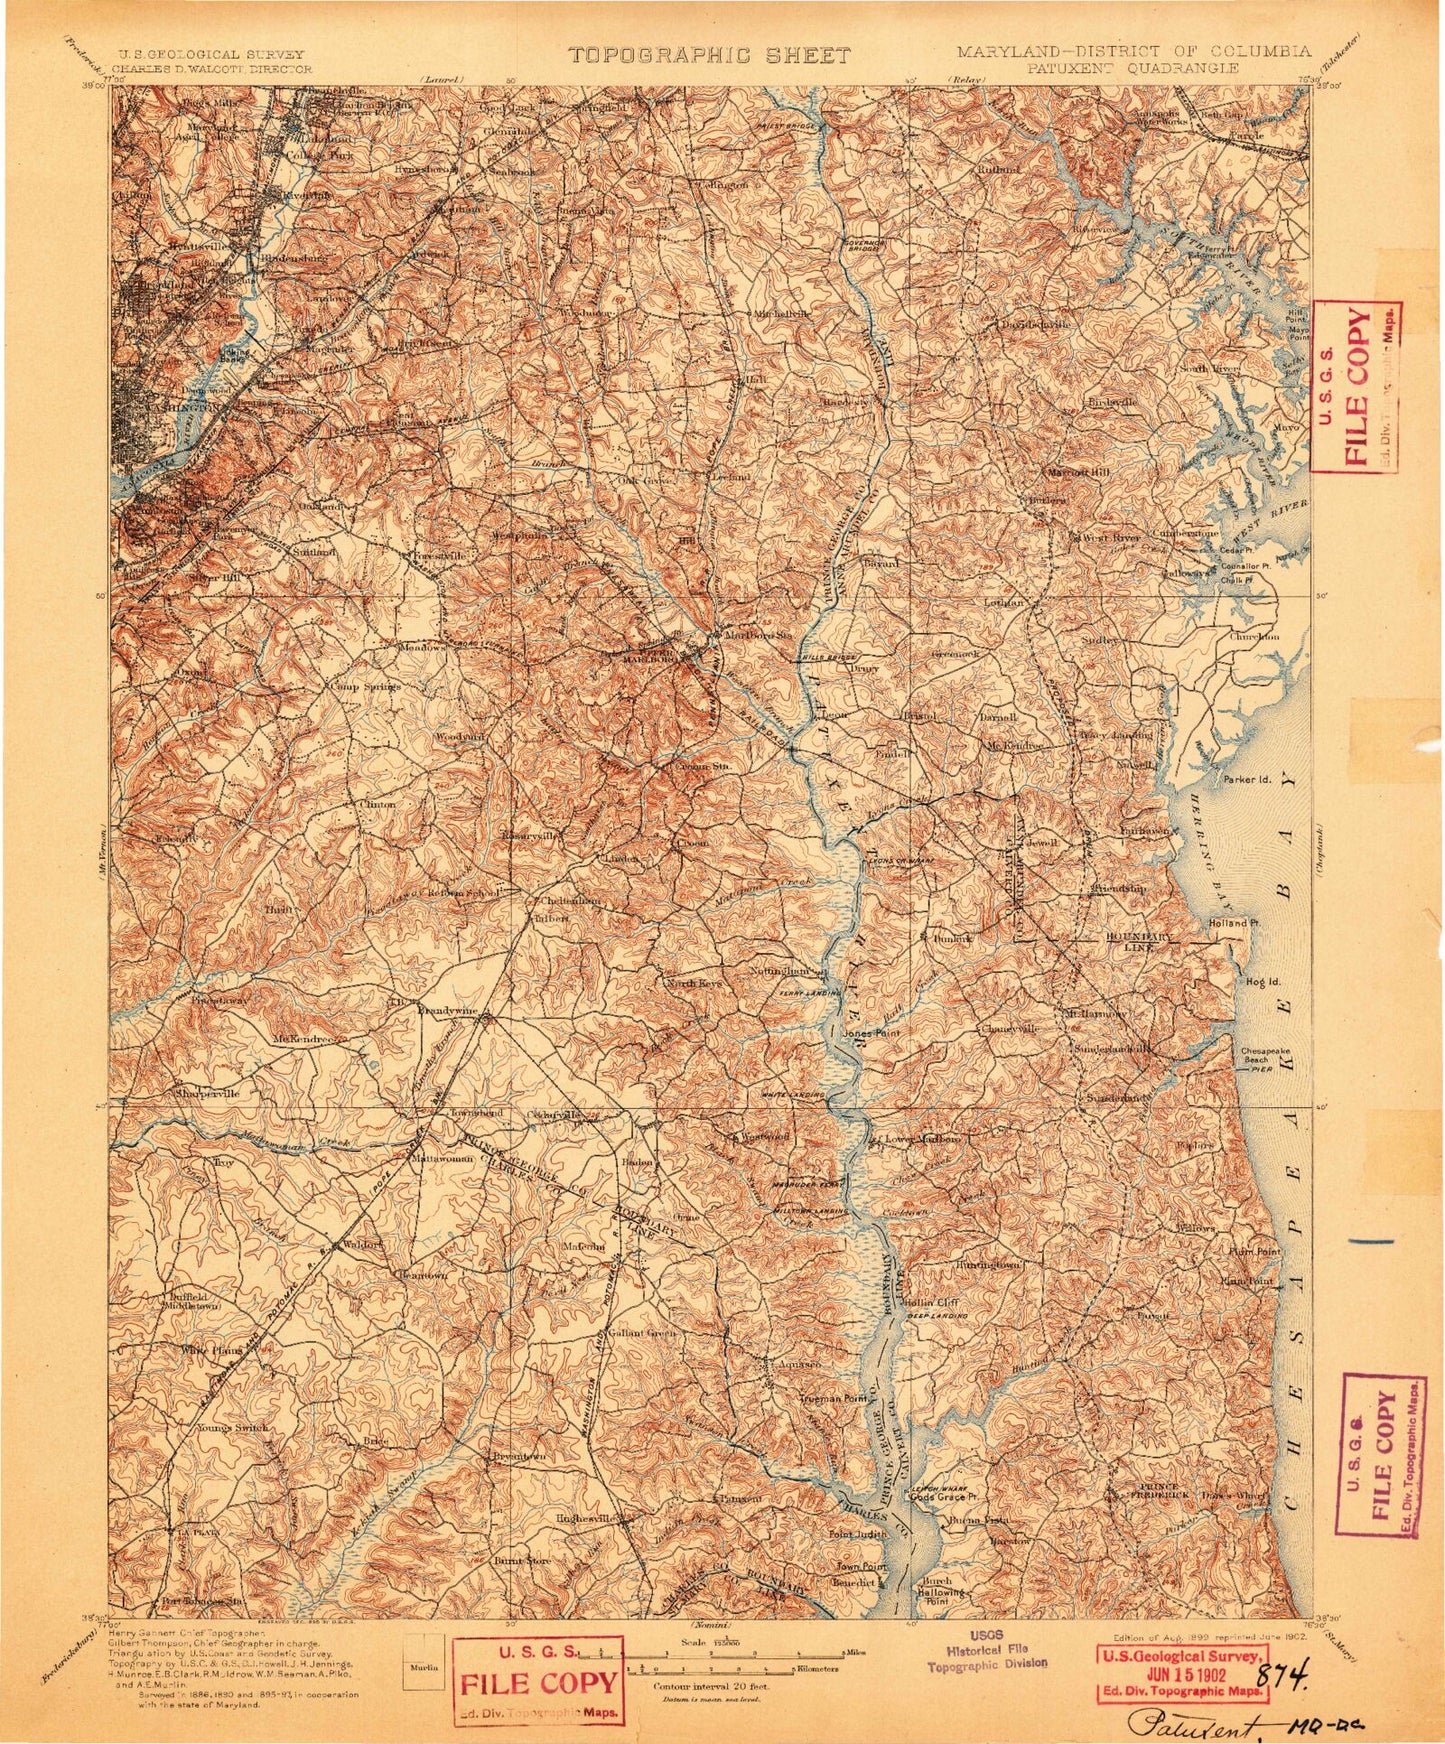 Historic 1899 Patuxent Maryland 30'x30' Topo Map Image